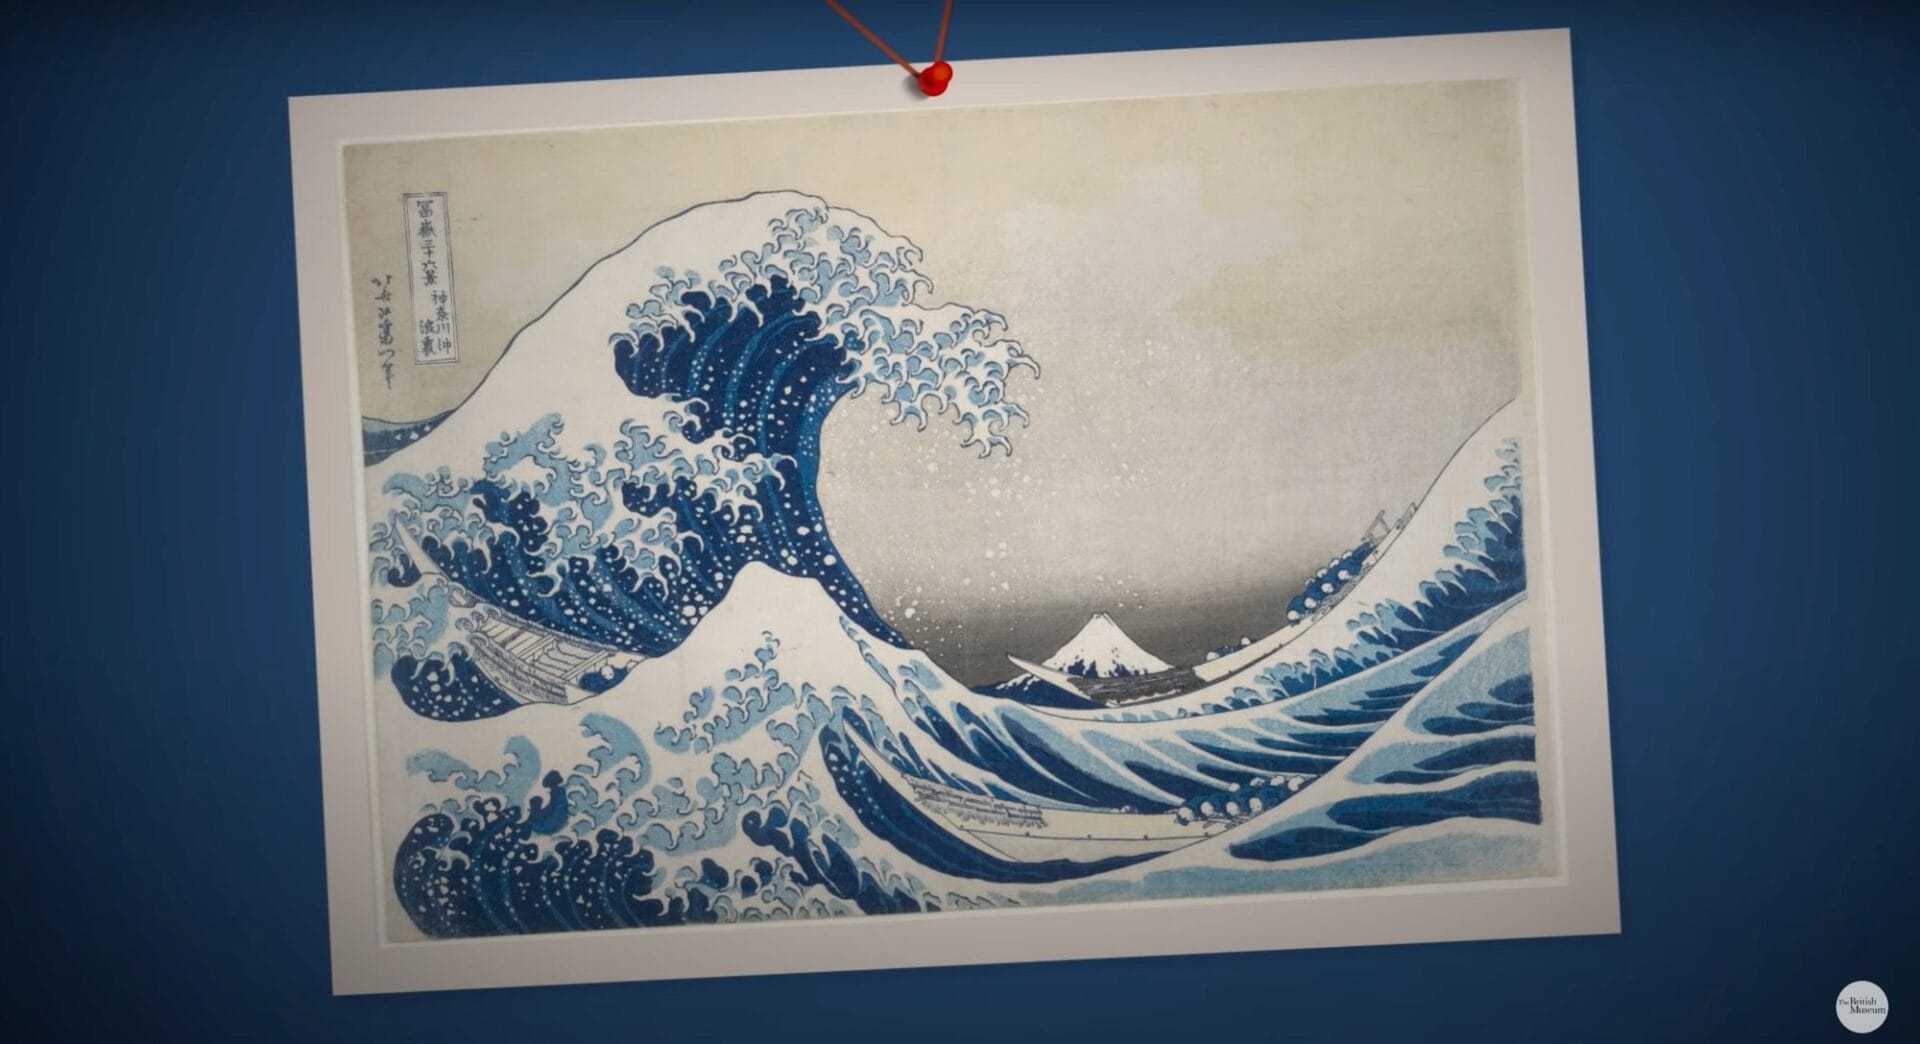 a still from a short documentary about Hokusai's "The Great Wave" print, showing a the print on a blue background